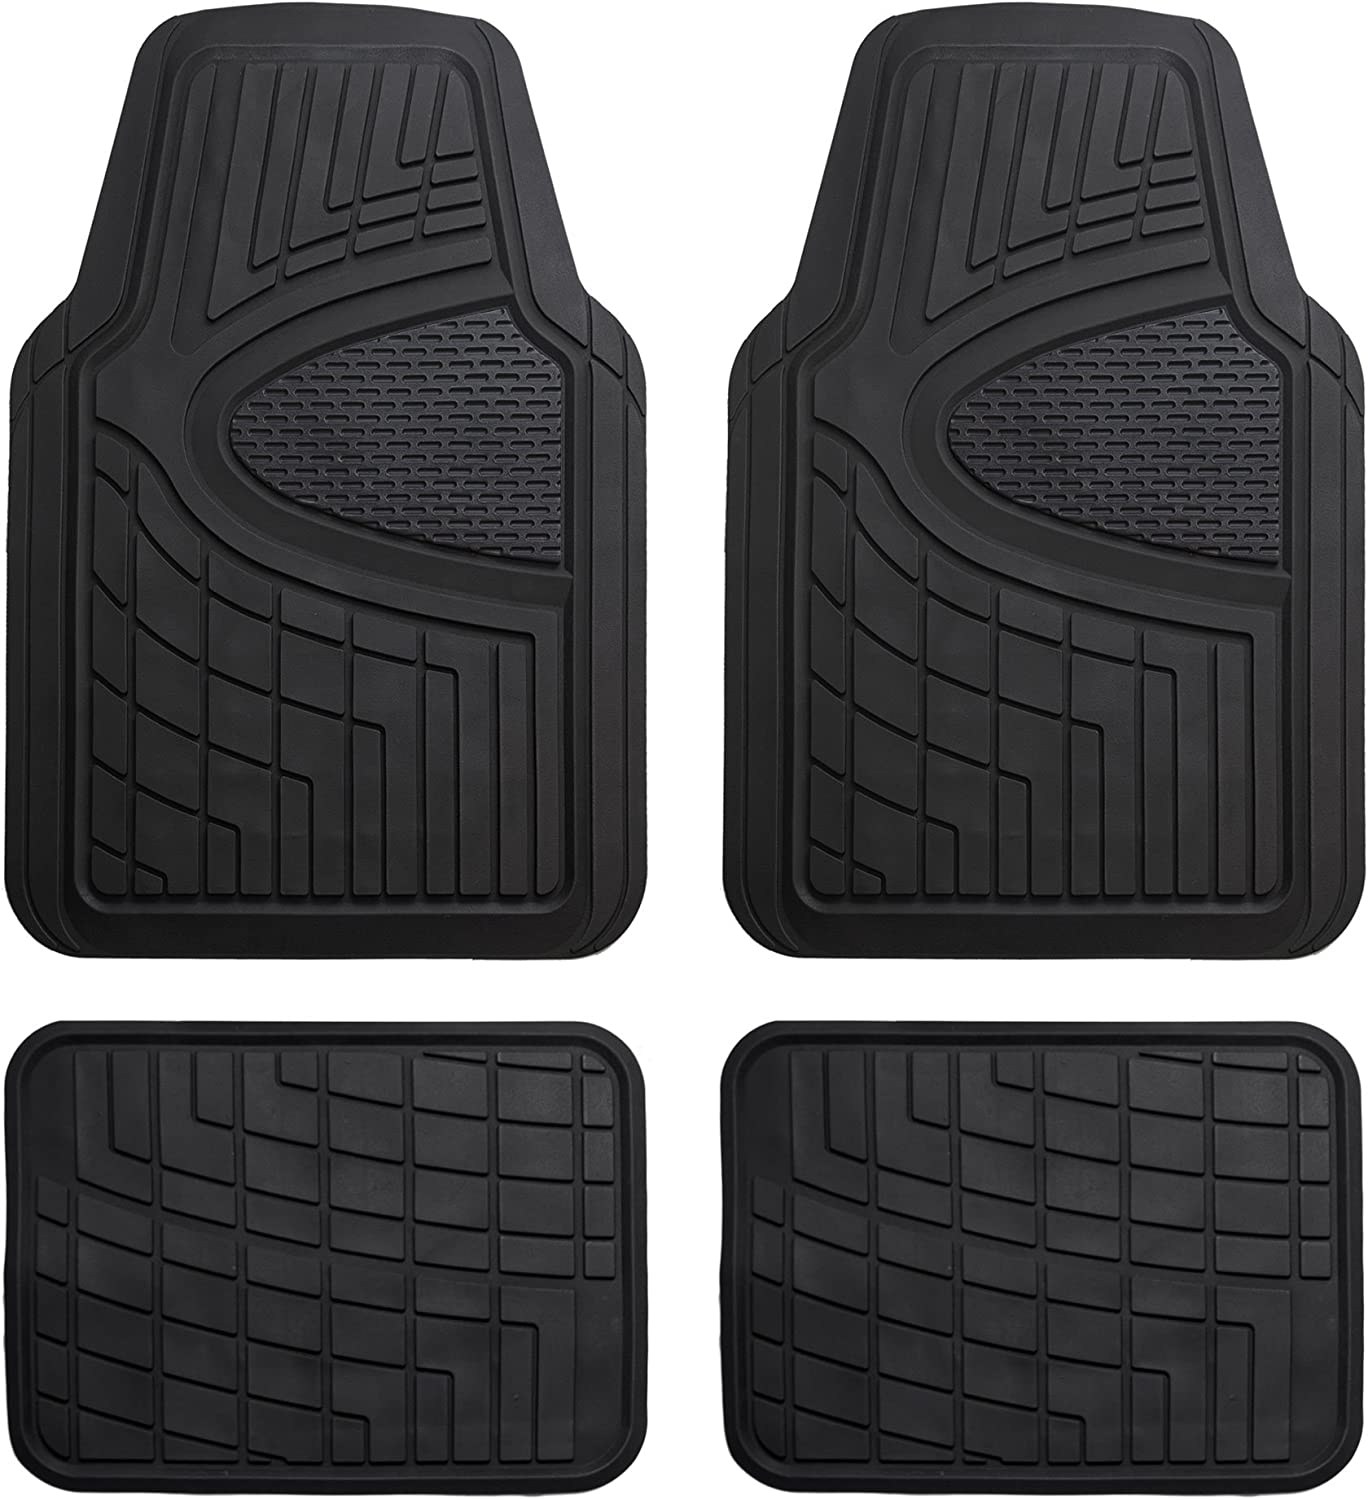 Uncovering the Top-Rated Rubber Floor Mats